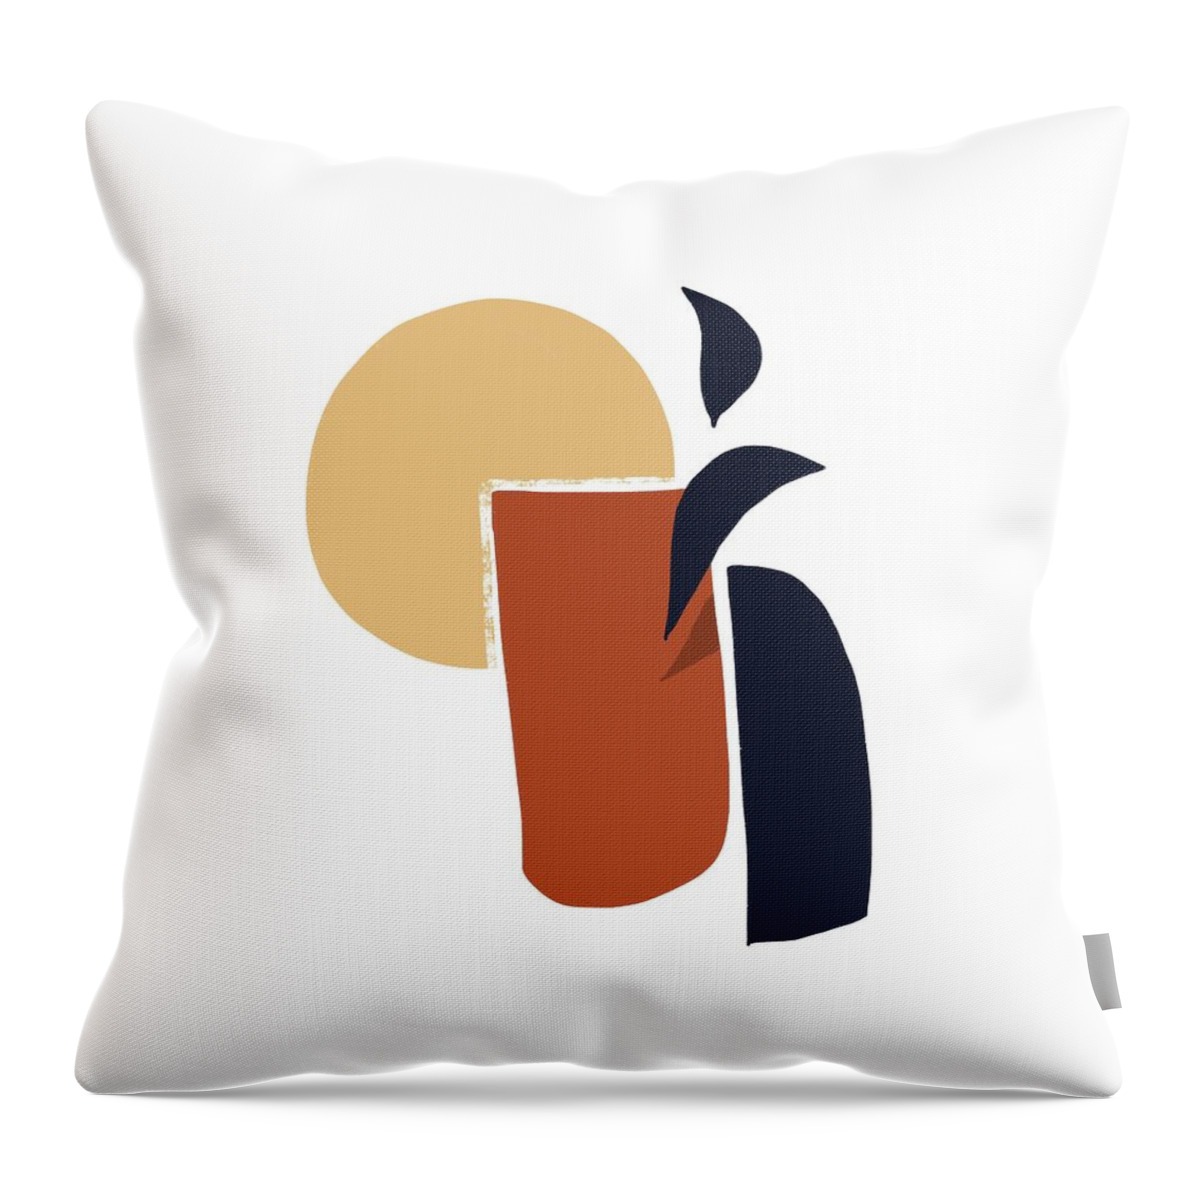 Abstract Throw Pillow featuring the digital art Elodie - Minimal, Modern Contemporary Abstract Painting by Studio Grafiikka